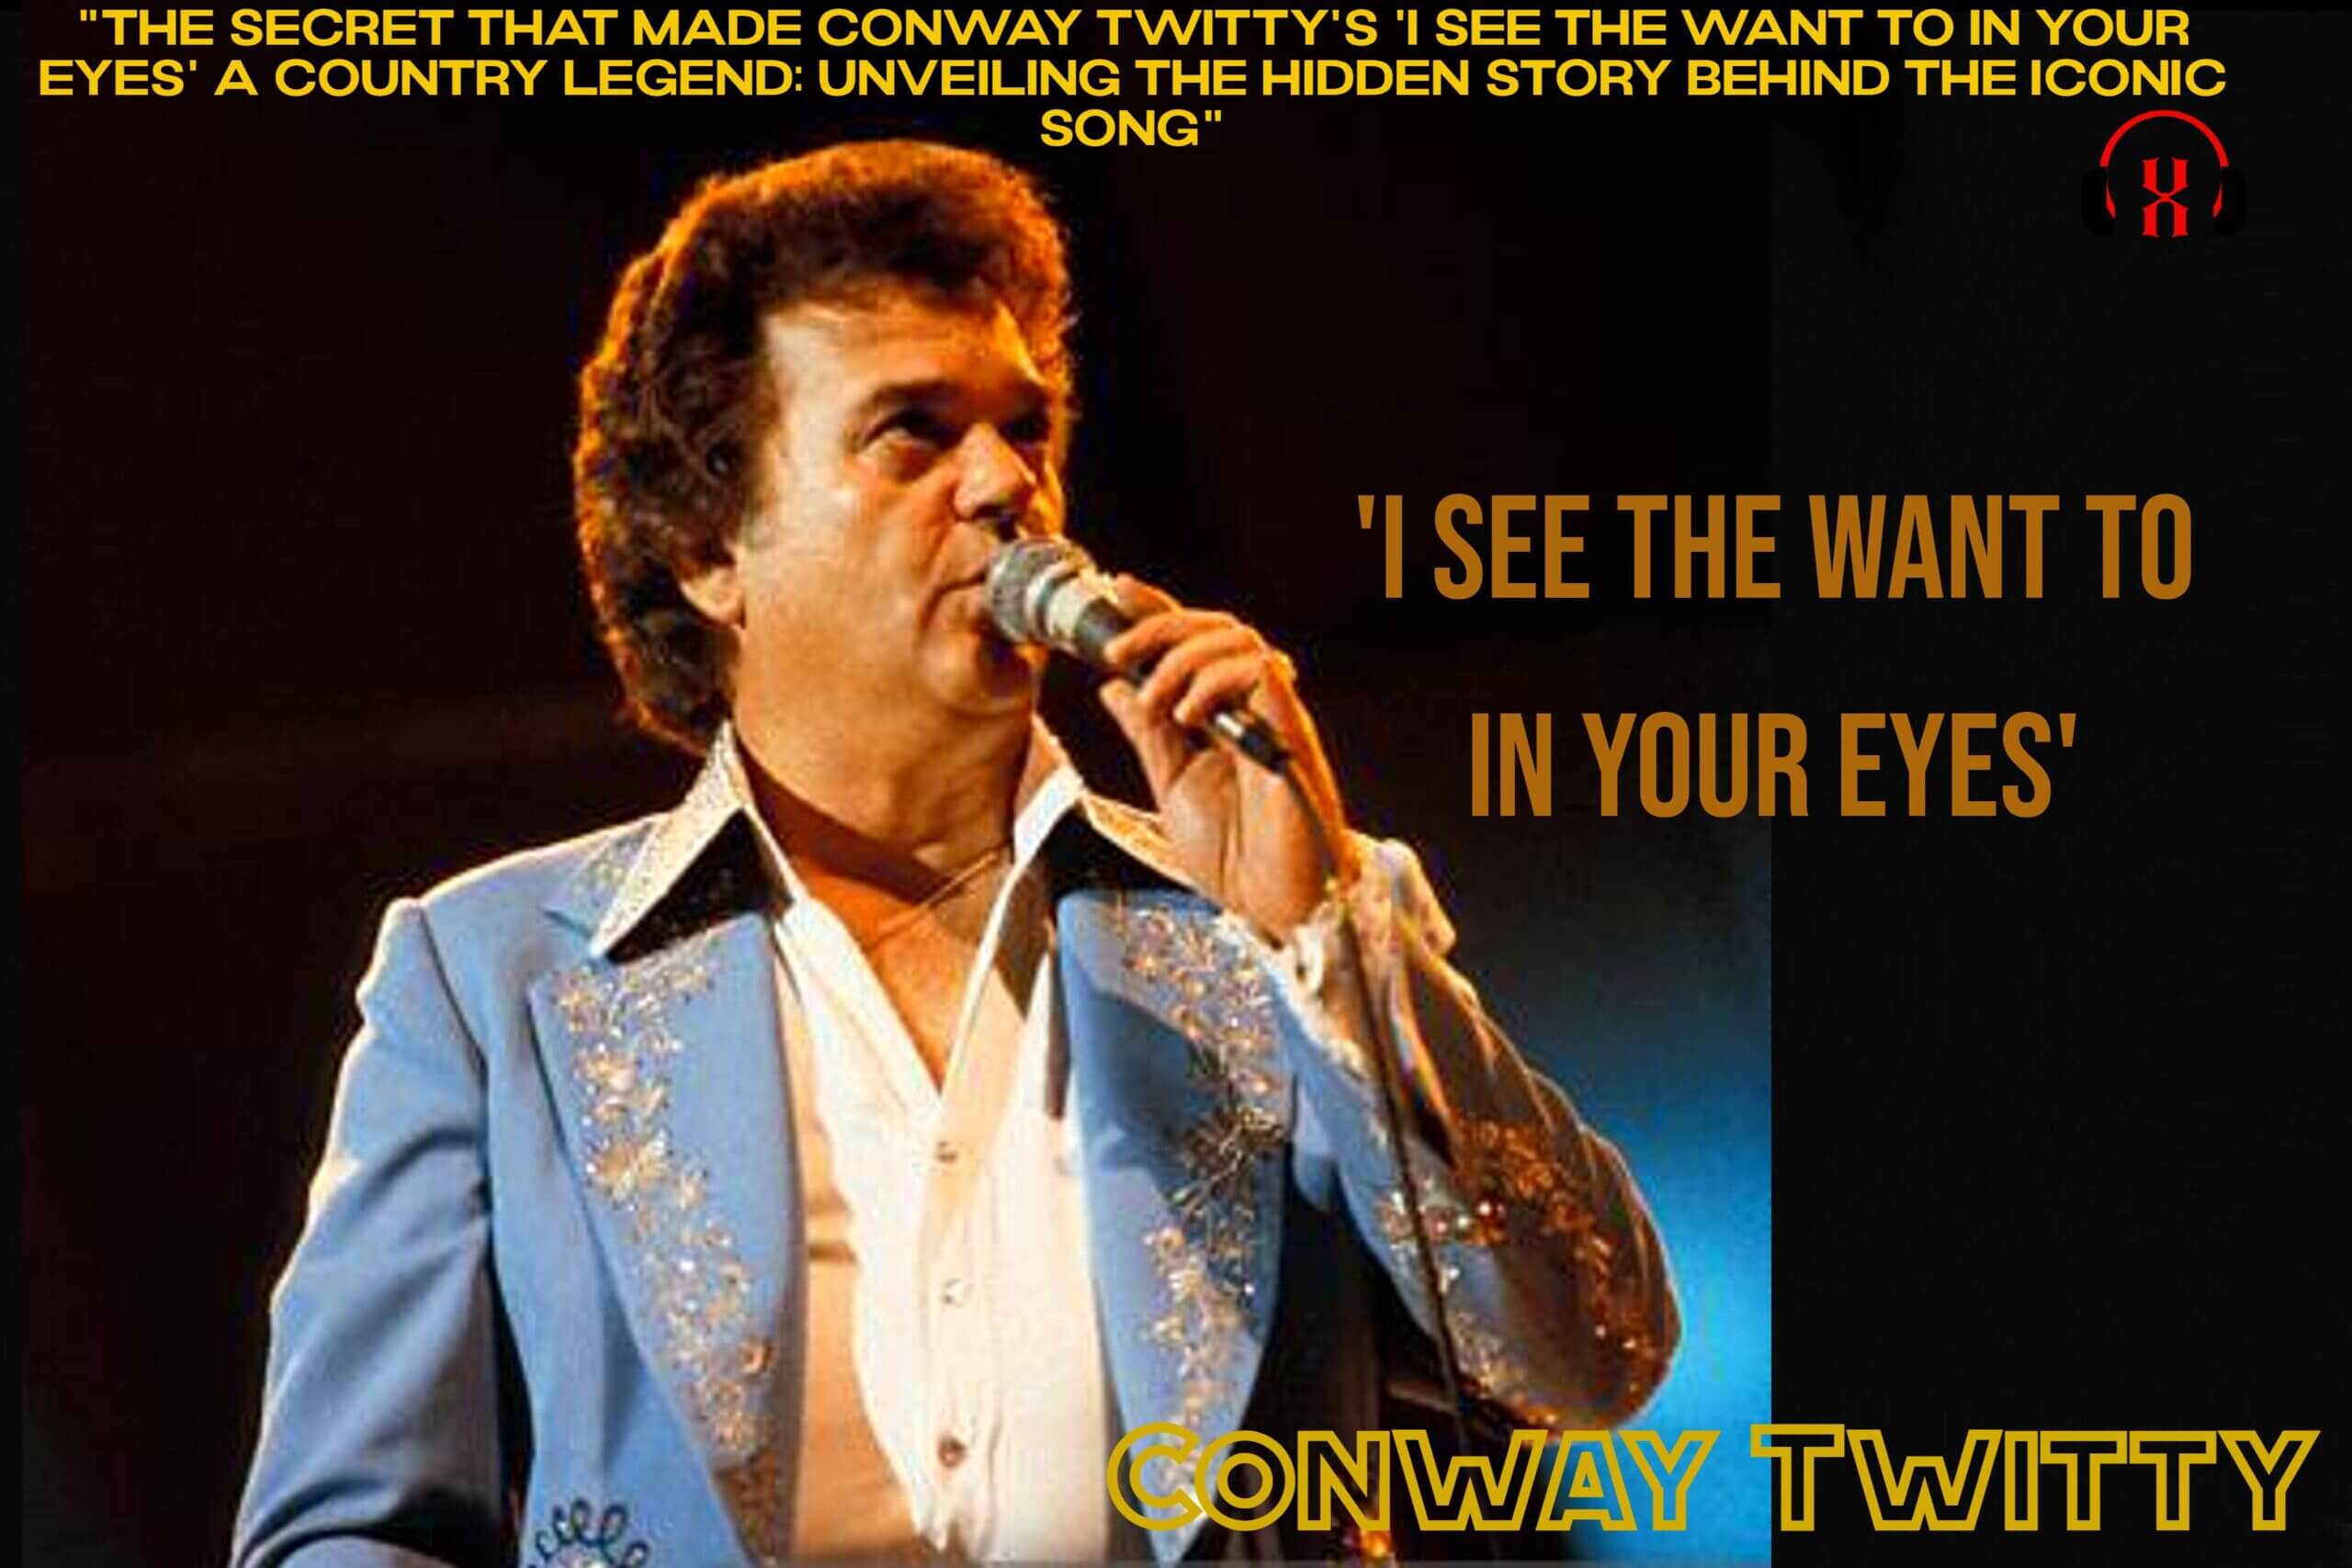 “The Secret That Made Conway Twitty’s ‘I See The Want To In Your Eyes’ a Country Legend: Unveiling the Hidden Story Behind the Iconic Song”